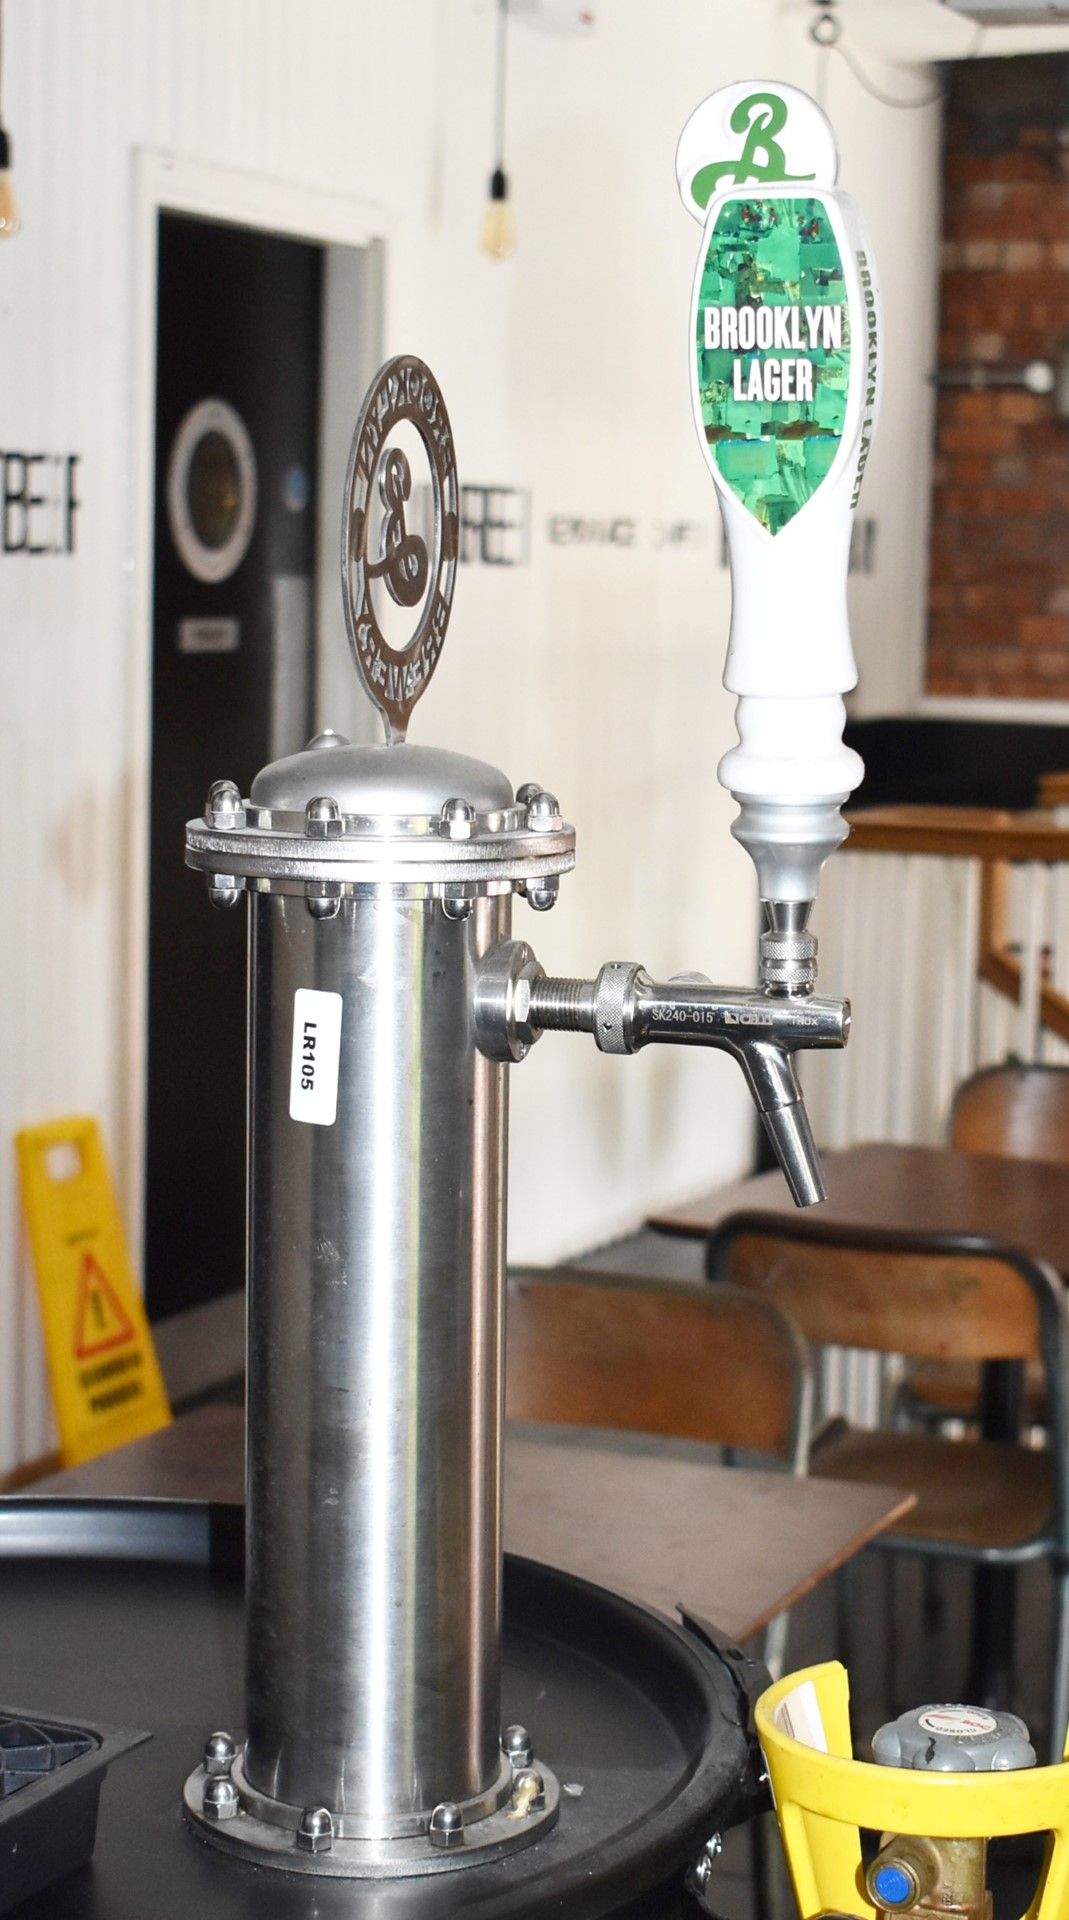 1 x Brooklyn Brewery Mobile Lager Beer Dispenser With Stainless Steel Pump, Barrel on Castors, Gas - Image 6 of 16